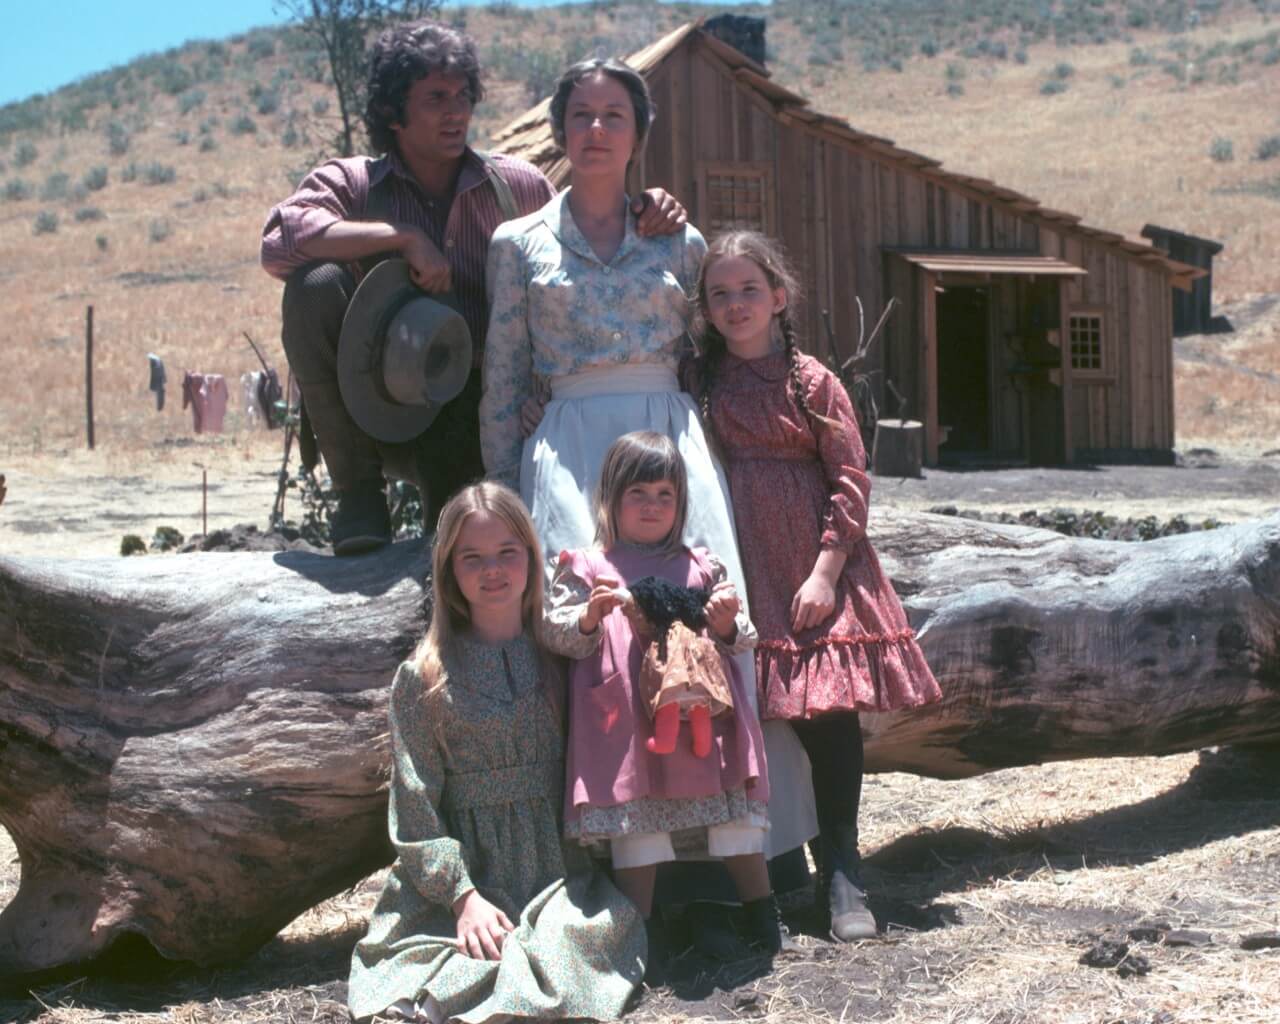 The cast of 'Little House on the Prairie' poses in front of the log house.